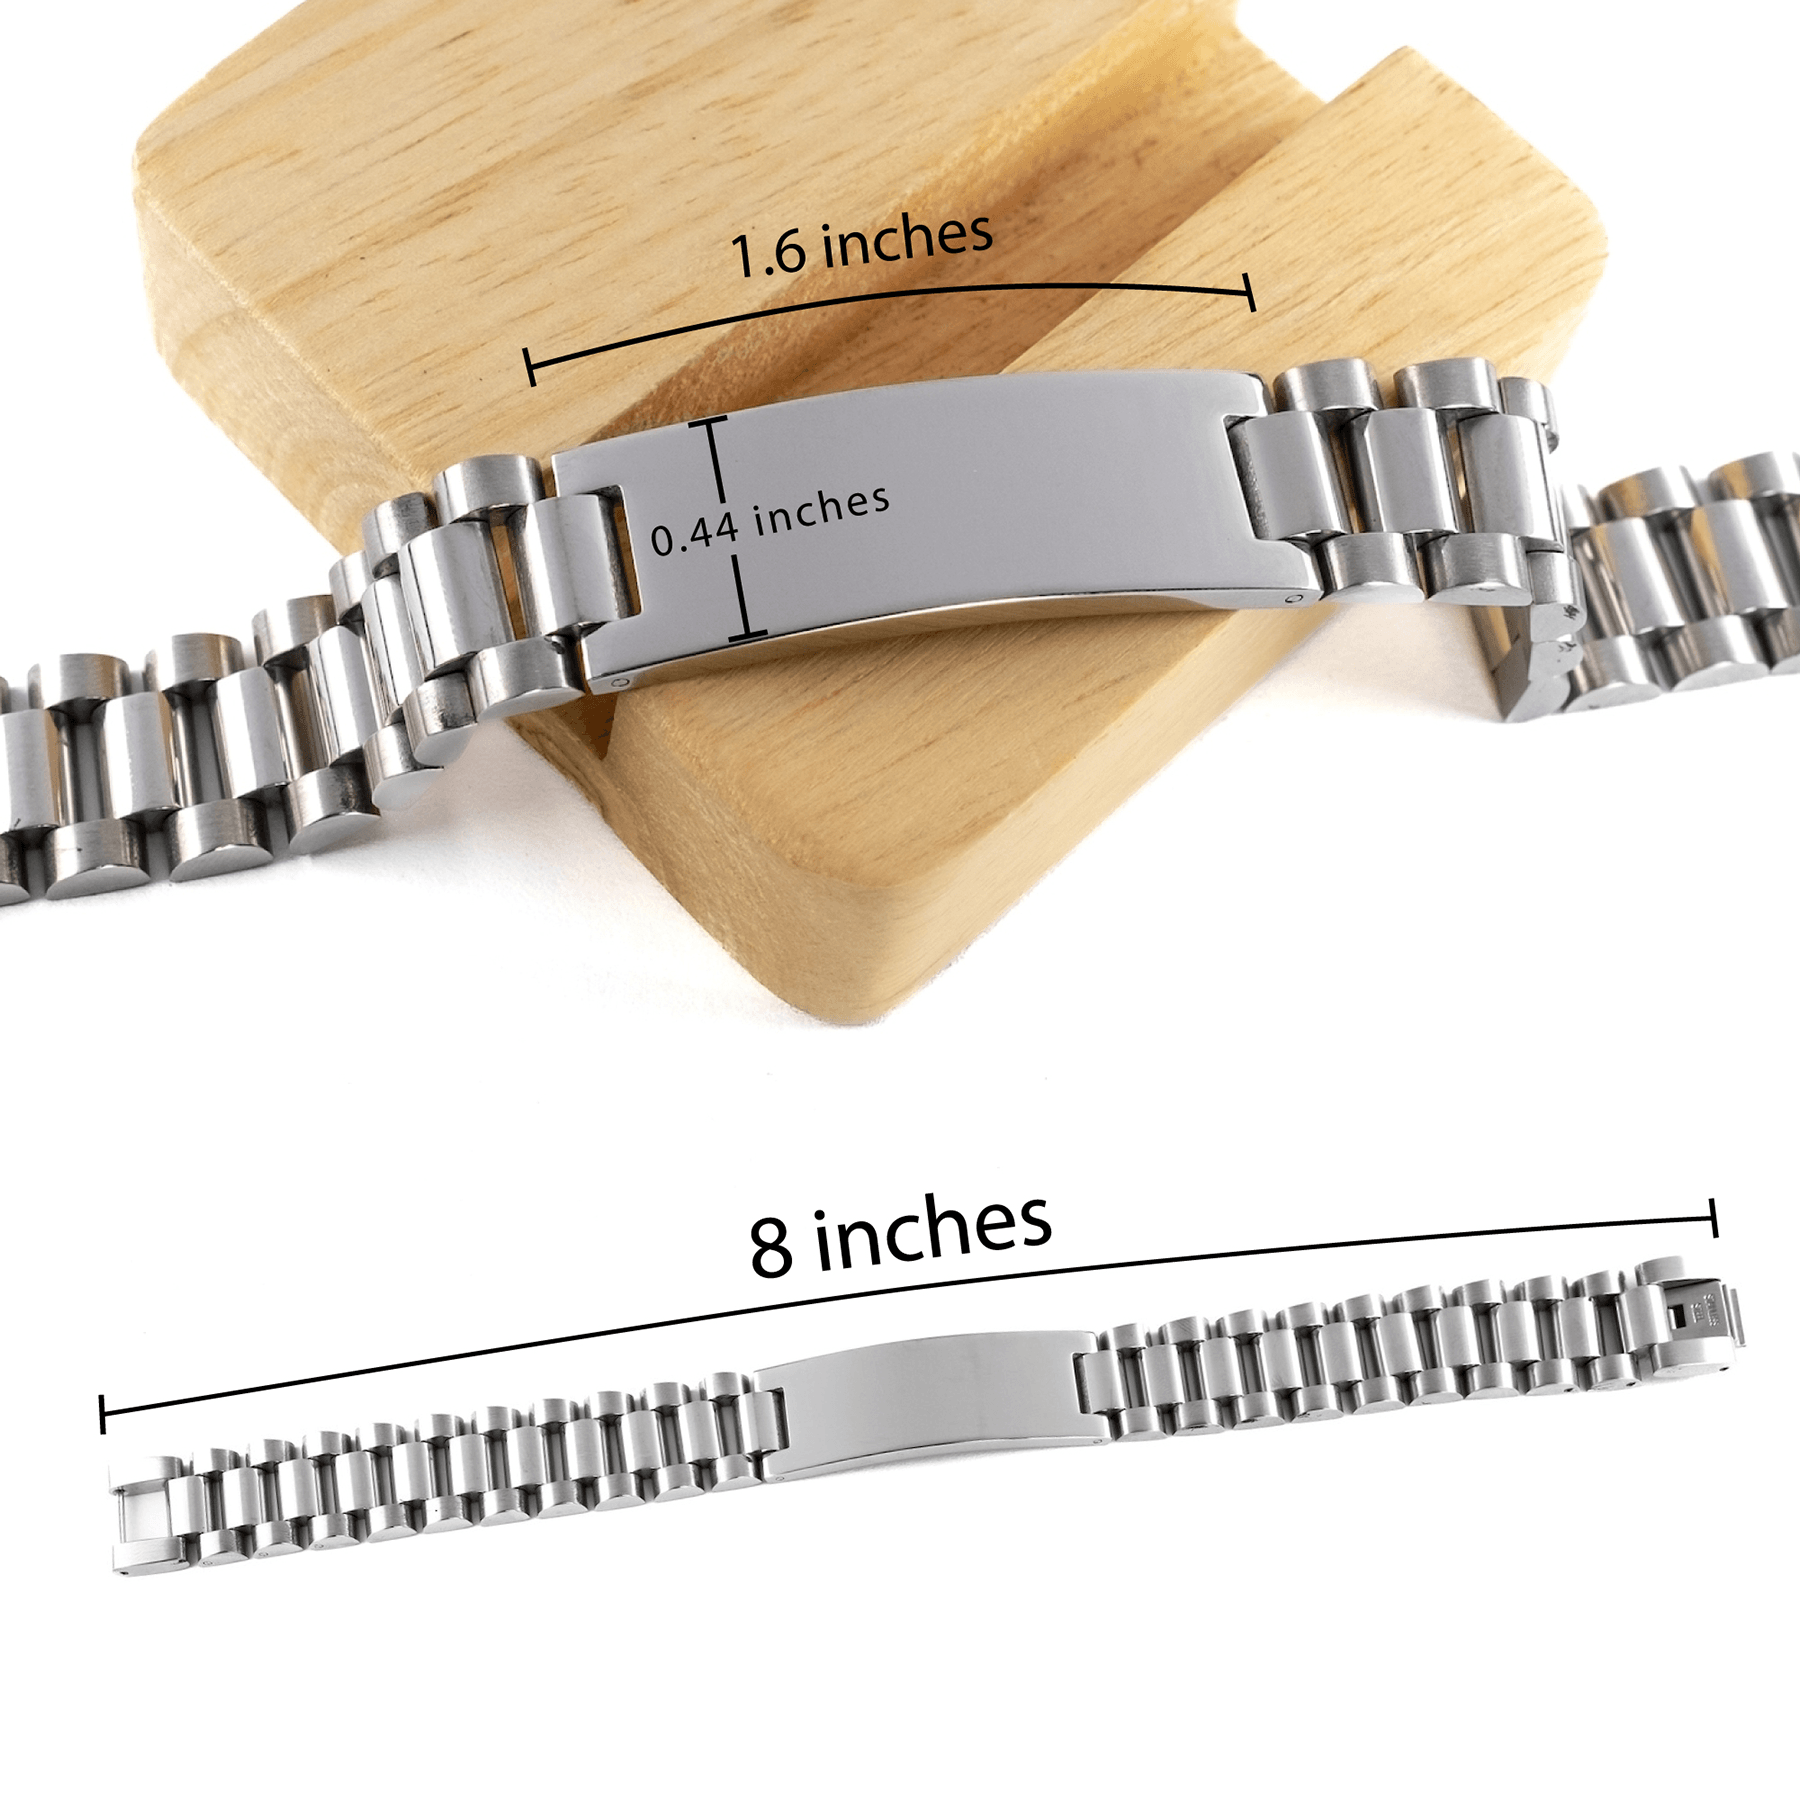 General Manager Ladder Stainless Steel Engraved Bracelet - Thanks for being who you are - Birthday Christmas Jewelry Gifts Coworkers Colleague Boss - Mallard Moon Gift Shop